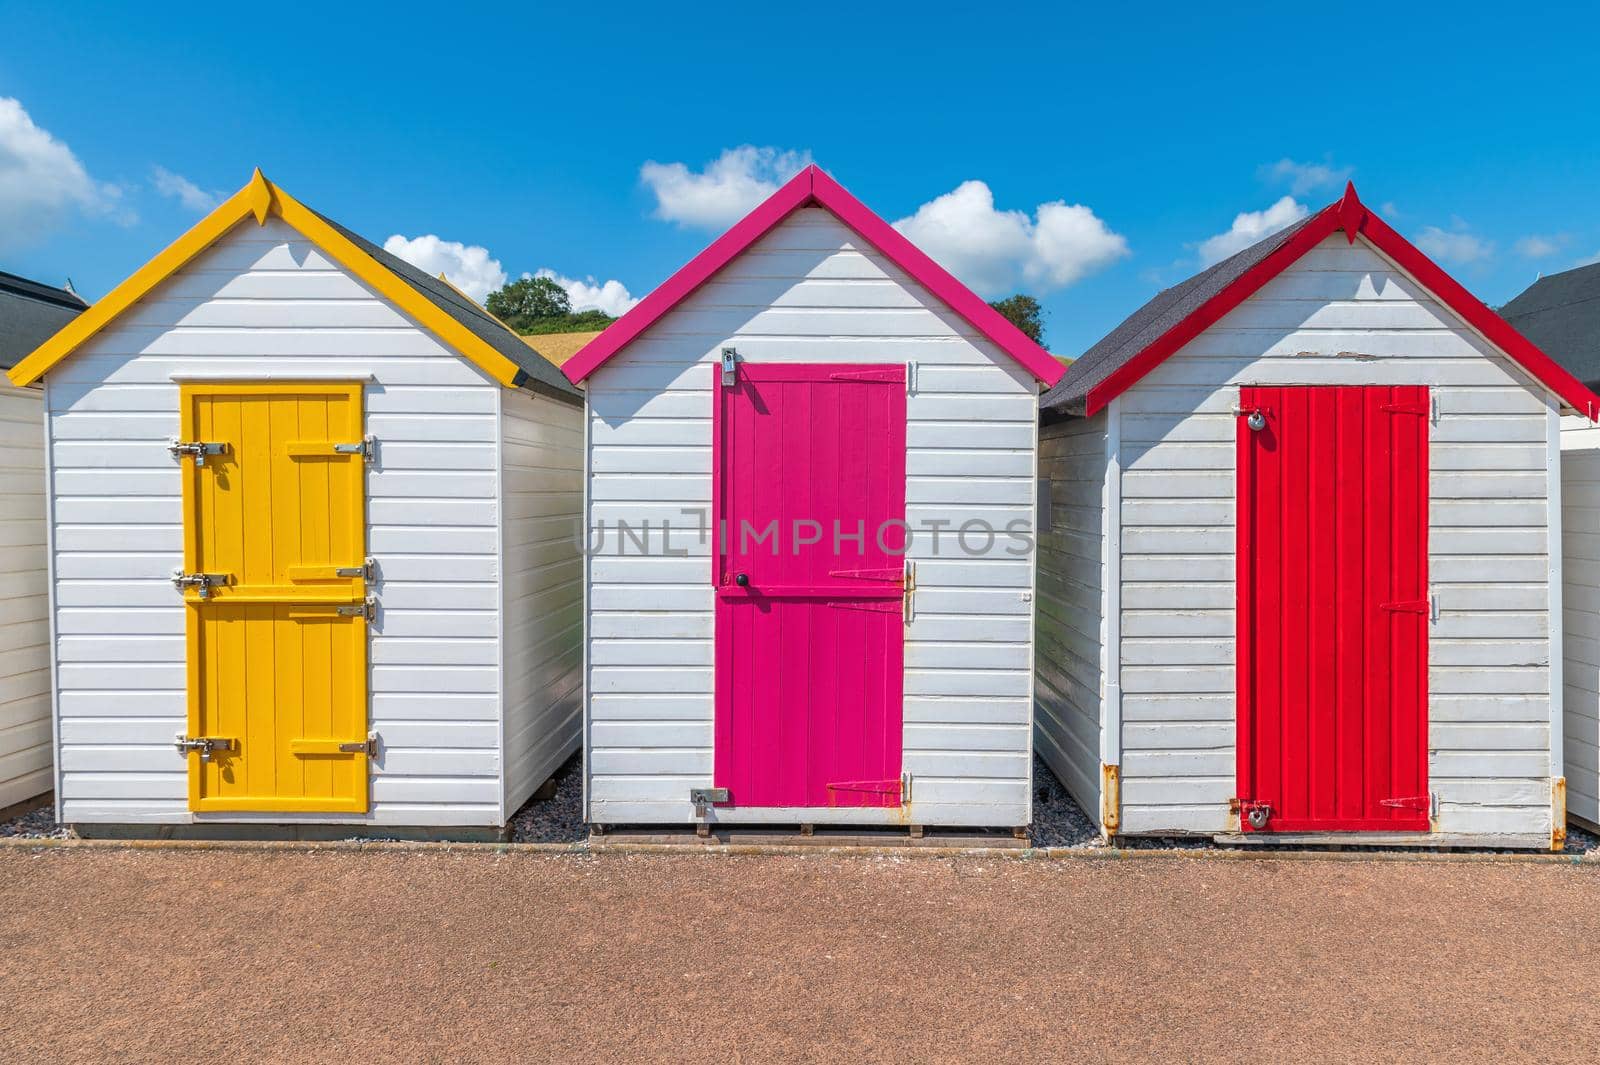 Colorful small beach houses. Multicolored beach sheds. Variety of painted beach shacks. Beach huts. Torbay, South Devon. UK. by Qba